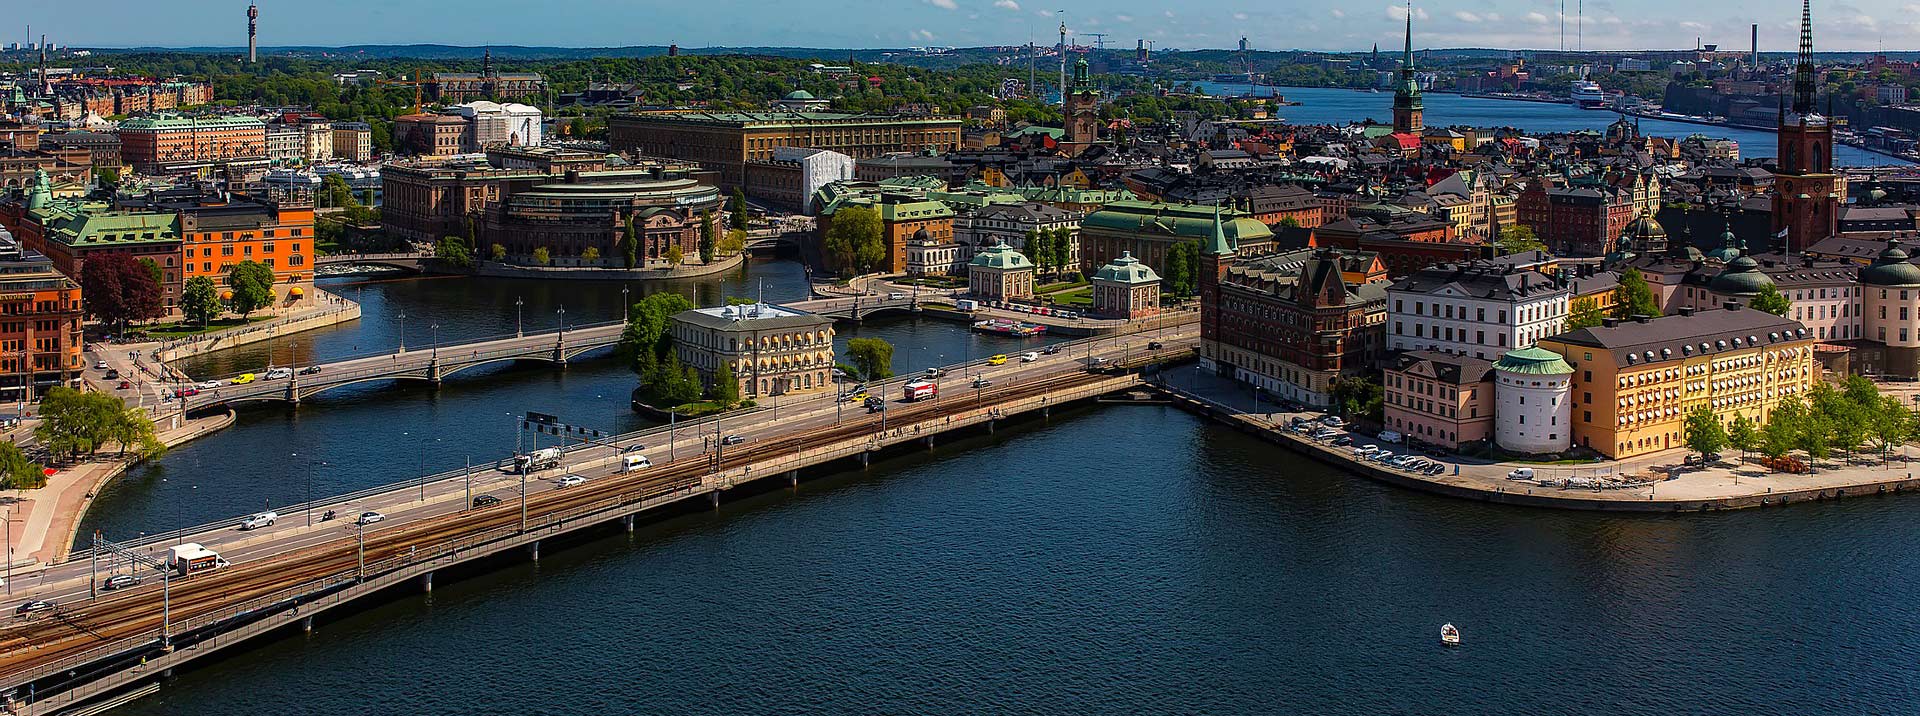 Discounted flight tickets from New York to Stockholm - IFlyFirstClass